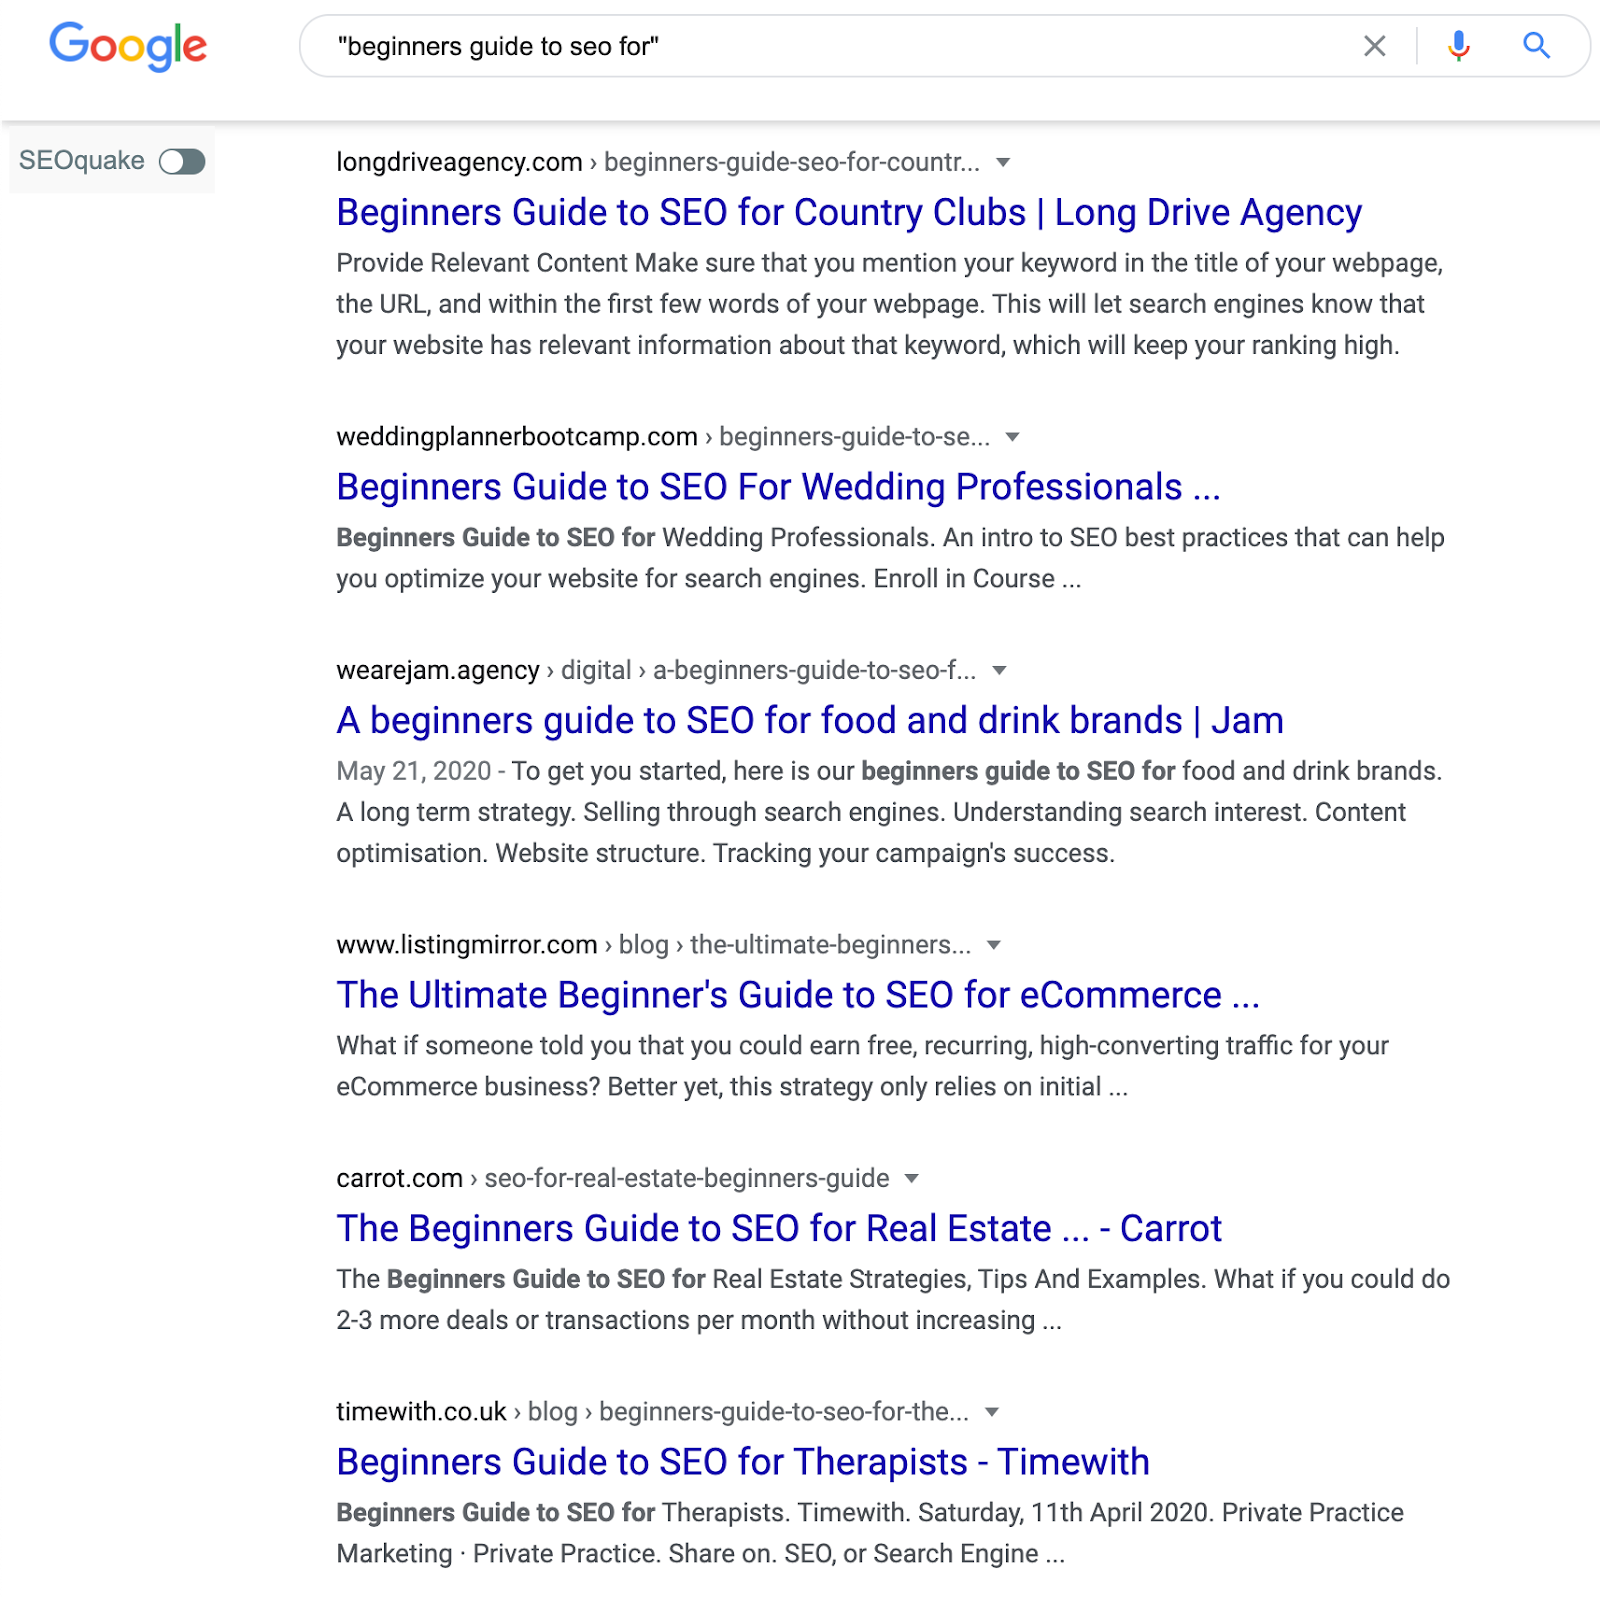 Multiple Pieces of Content from One SERP